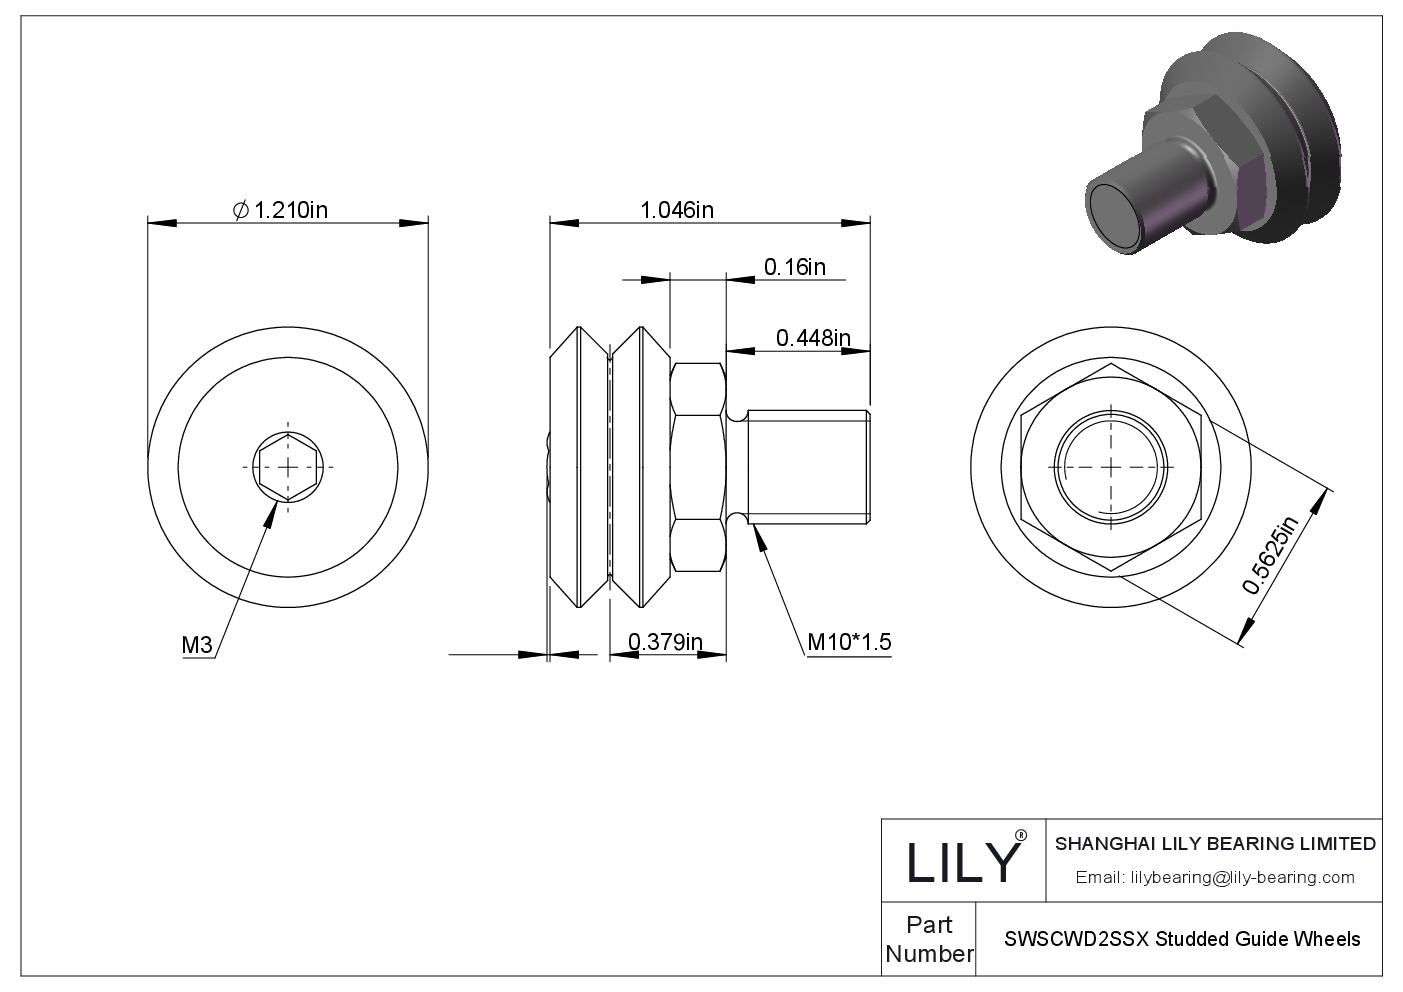 SWSCWD2SSX Studded Guide Wheels cad drawing